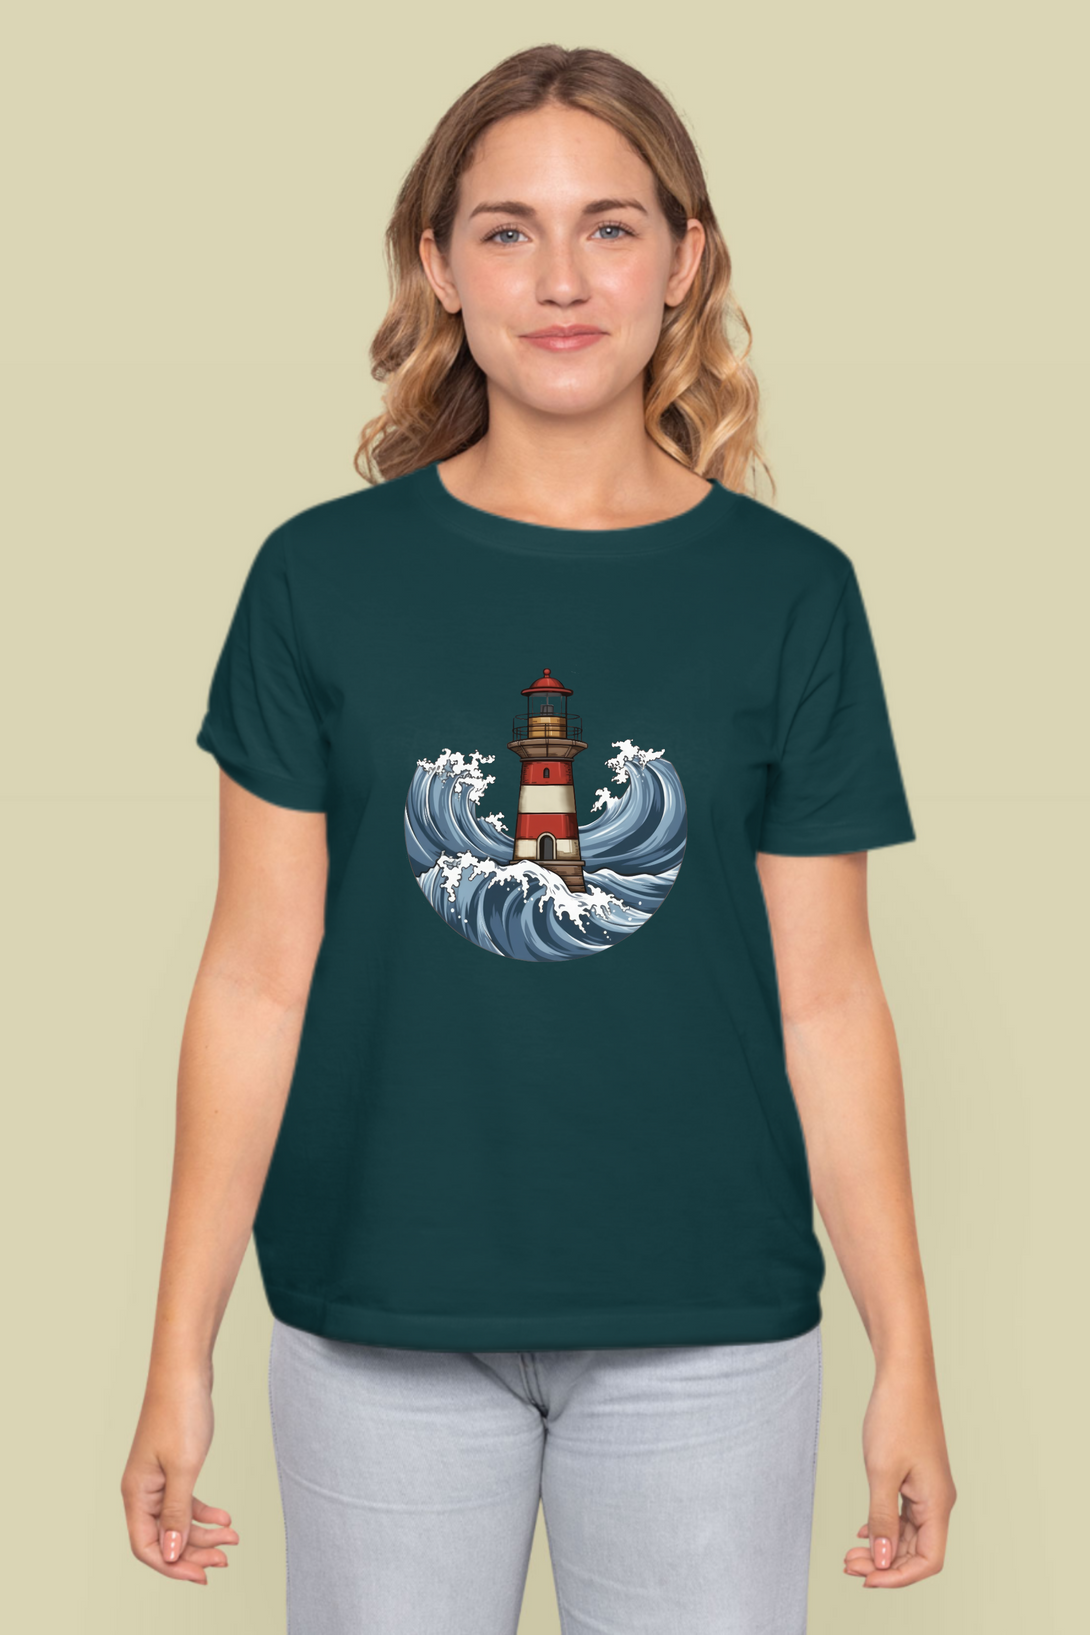 Lighthouse And Waves Printed T-Shirt For Women - WowWaves - 8